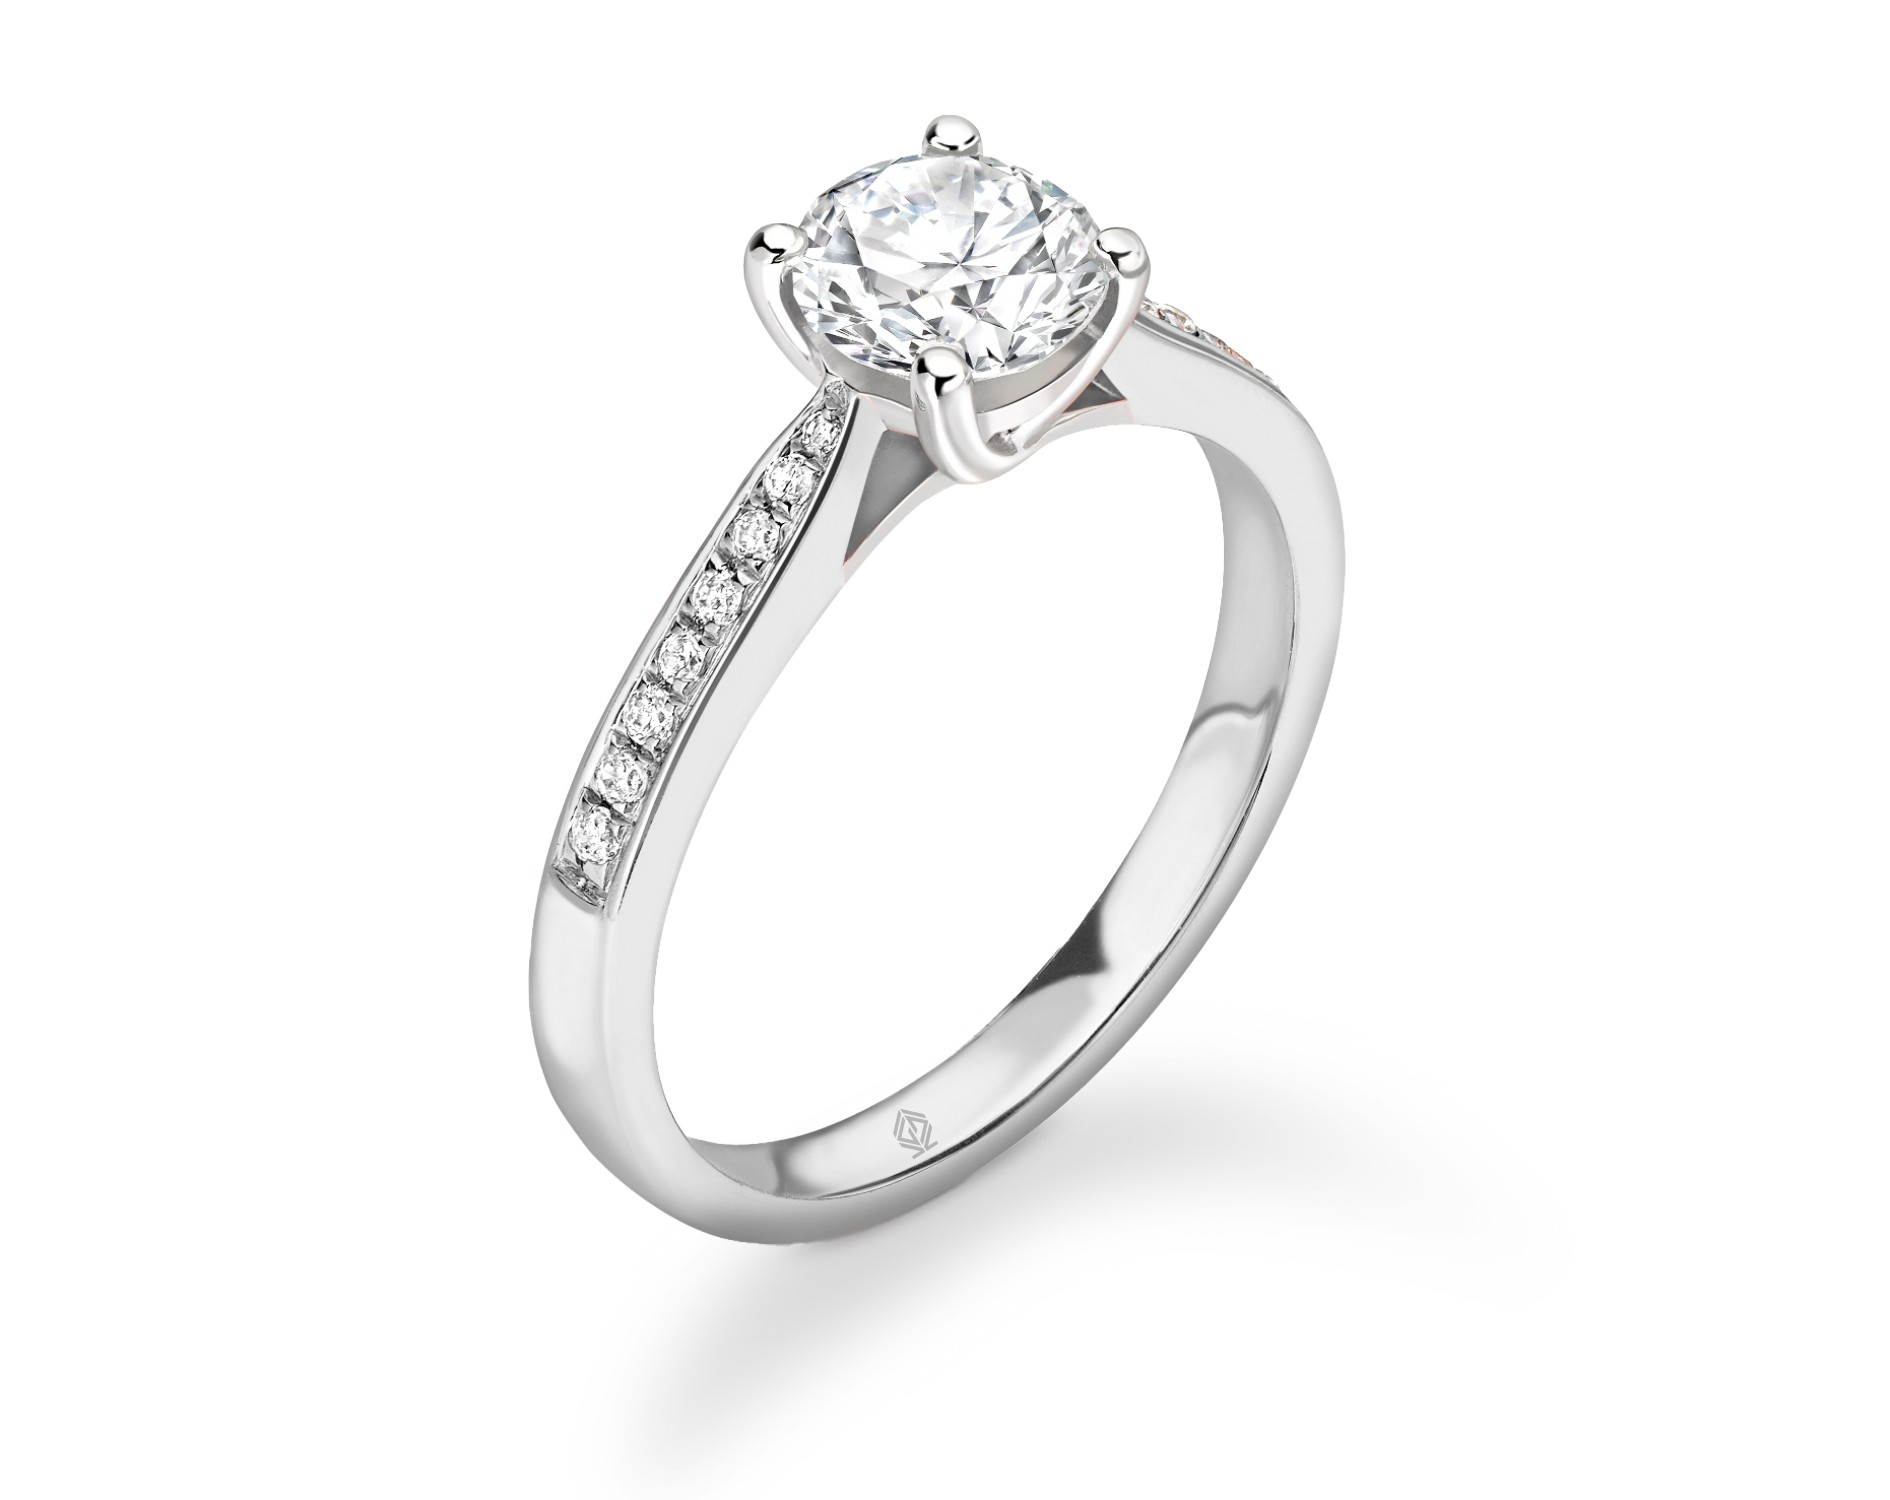 18K WHITE GOLD ROUND CUT DIAMOND RING WITH SIDE STONES CHANNEL SET